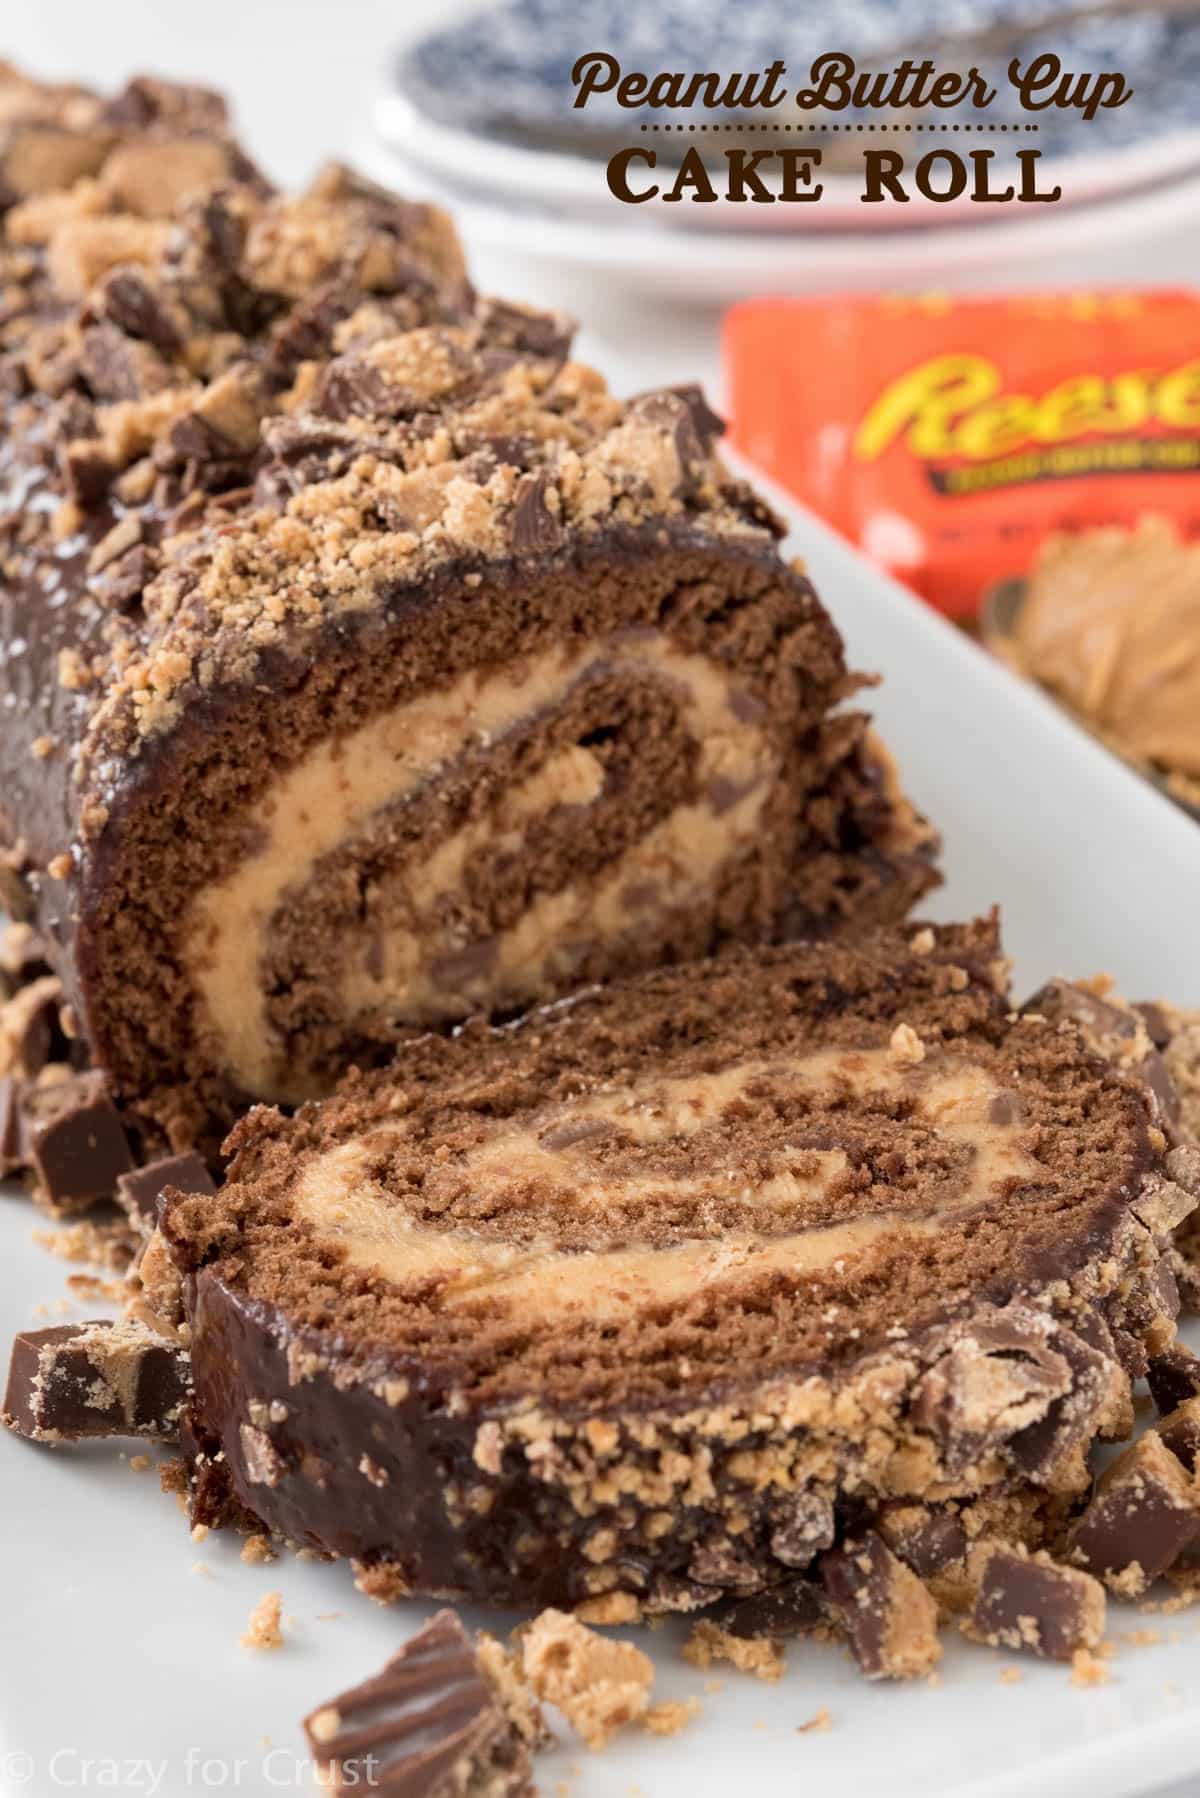 Peanut Butter Cup Cake Roll - it's an elegant dessert that is actually an easy recipe to make! Chocolate cake filled with peanut butter cup filling - the perfect dessert!